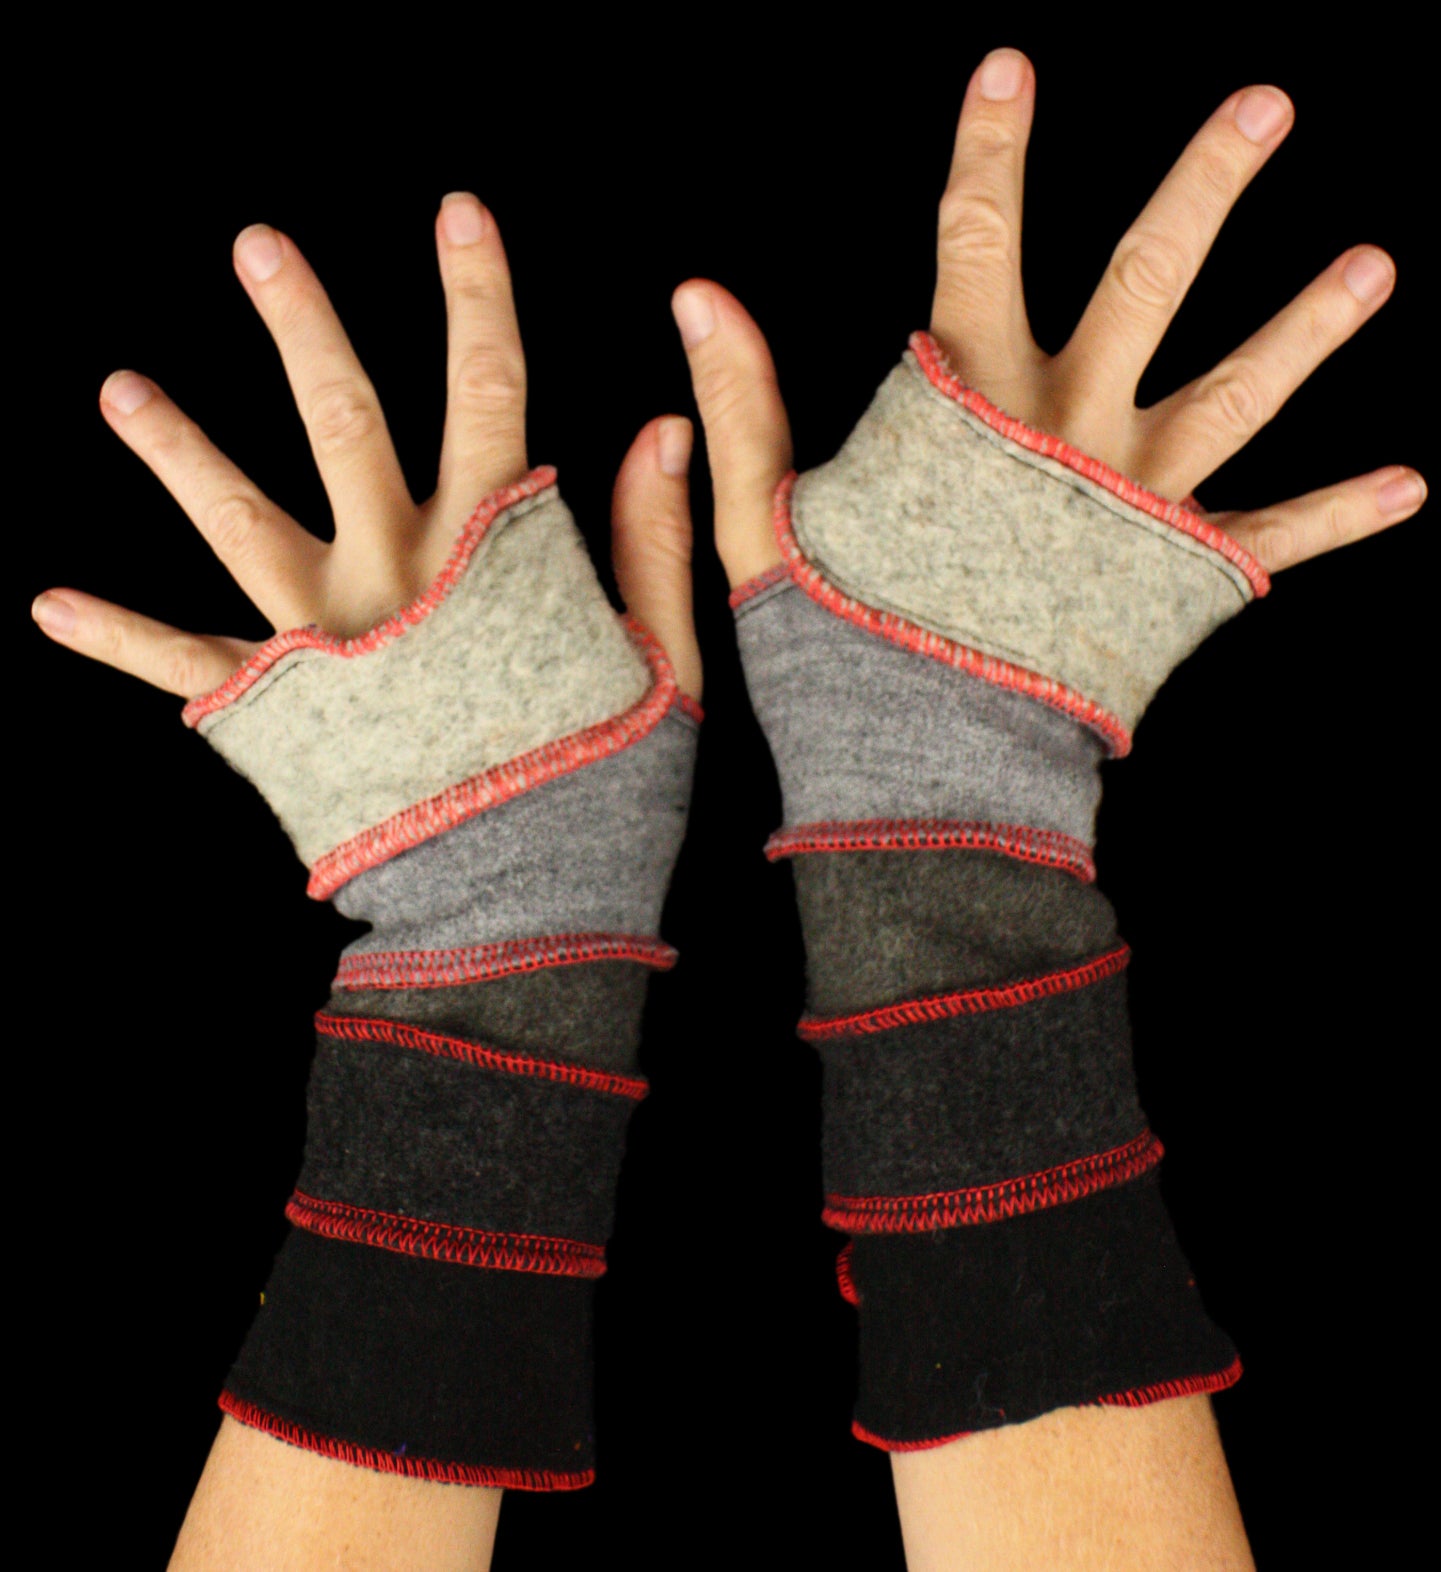 Arm Warmers - LARGE - made from upcycled sweaters